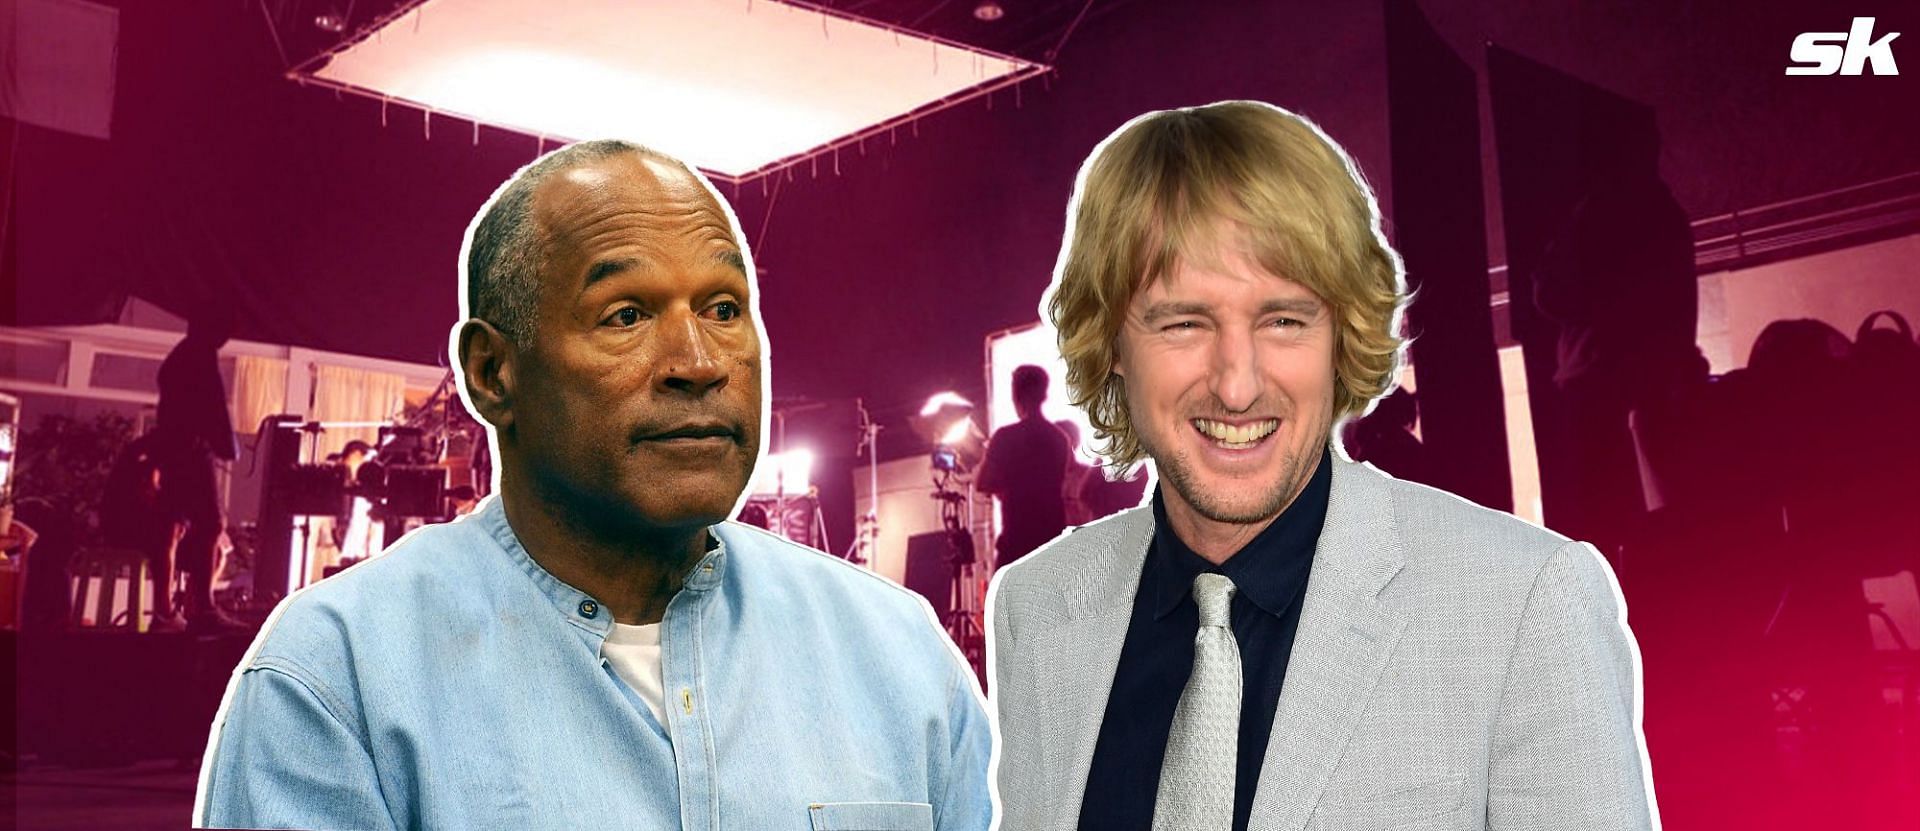 O.J. Simpson movie suffers $12,000,000 Owen Wilson setback after late NFL RB&rsquo;s untimely death